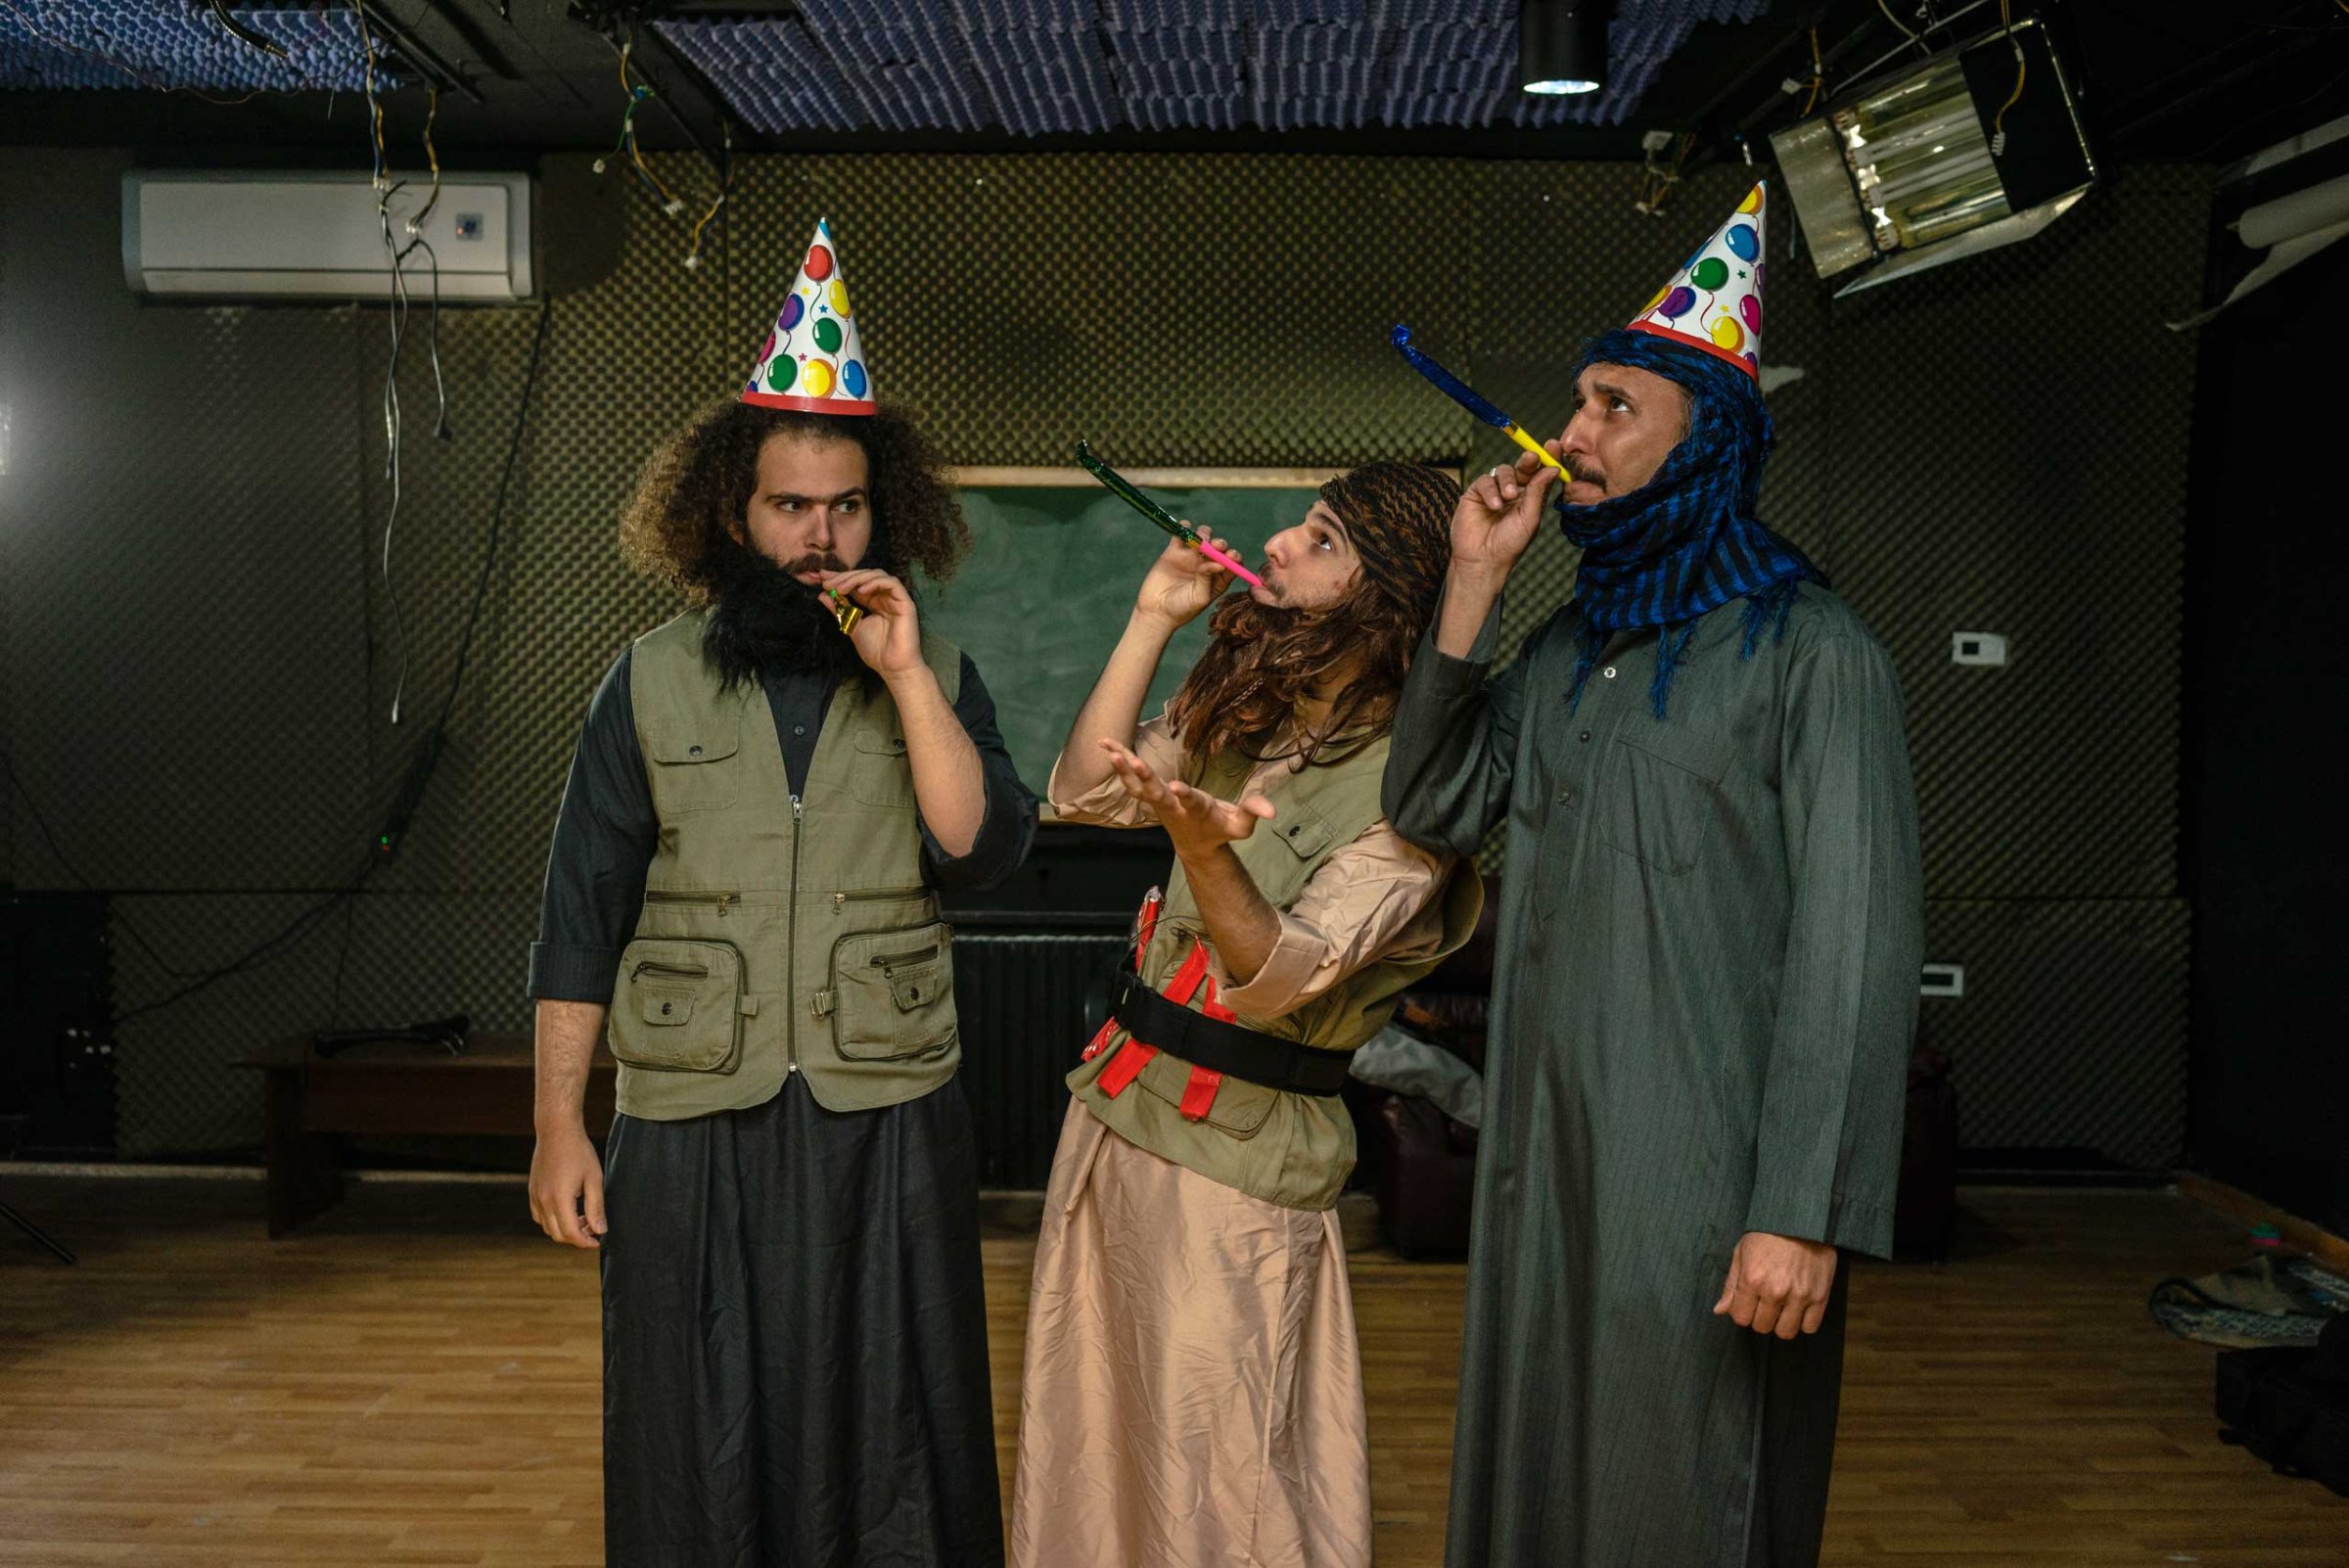 ( From L-R) Alhakam Turki, Shwan Sarheng and Mustafa Saedi practice in the  yet to be built set for the second series of the Al-Basheer show that will be filmed later in the year,  in Amman Jordan. In this sketch the three main characters dress up in fake I.S militant clothing and parody the group.